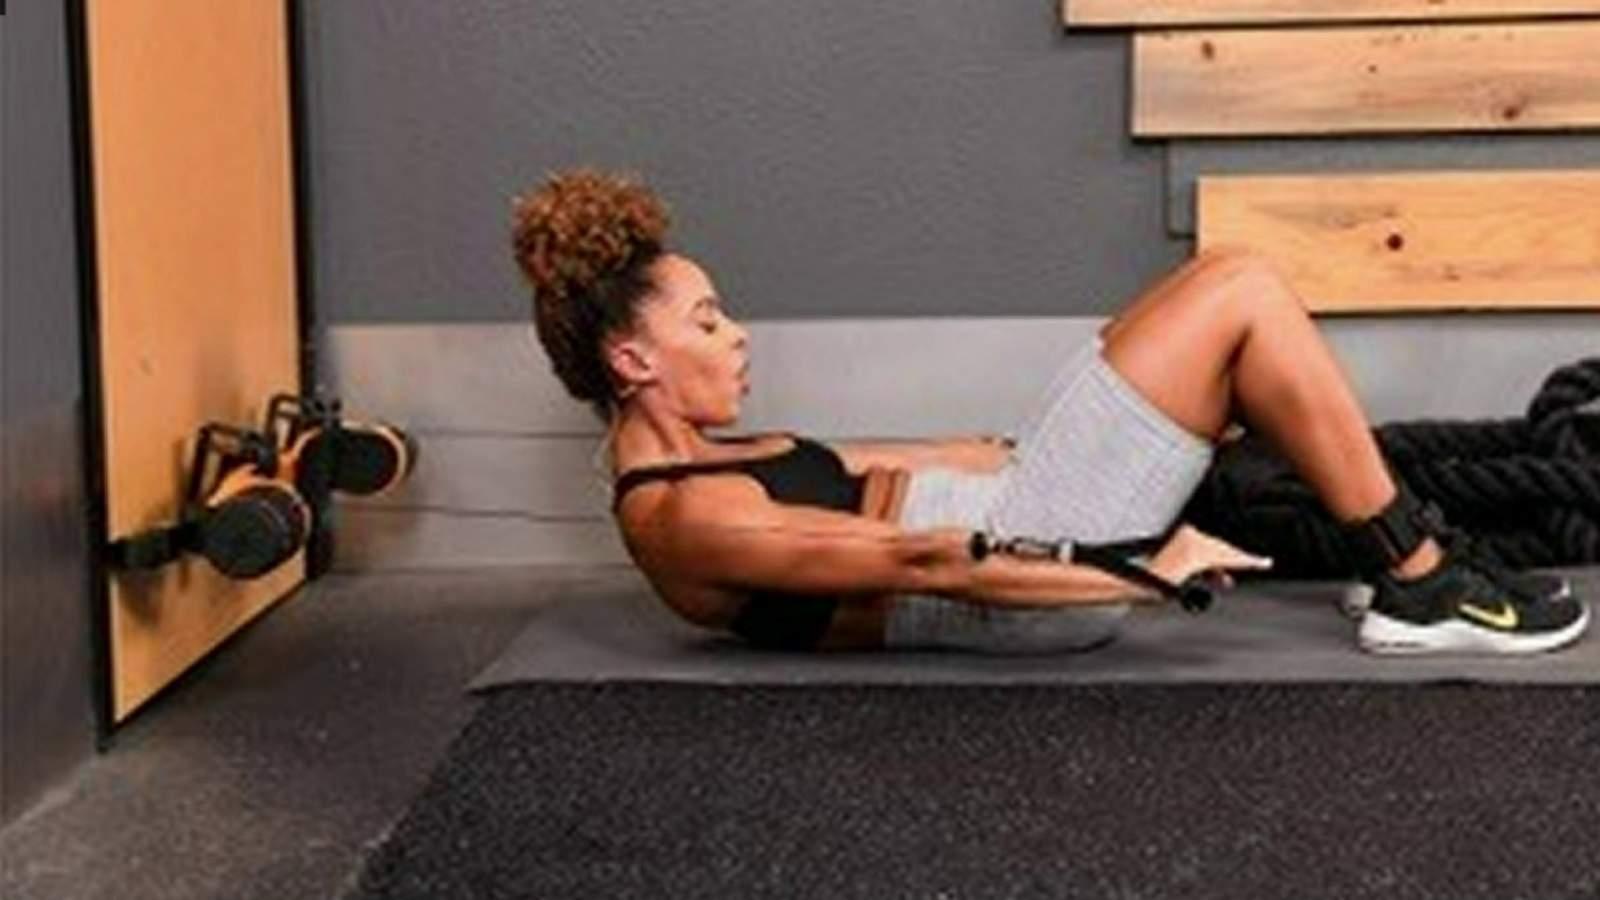 This local invention can upgrade your home workout routine